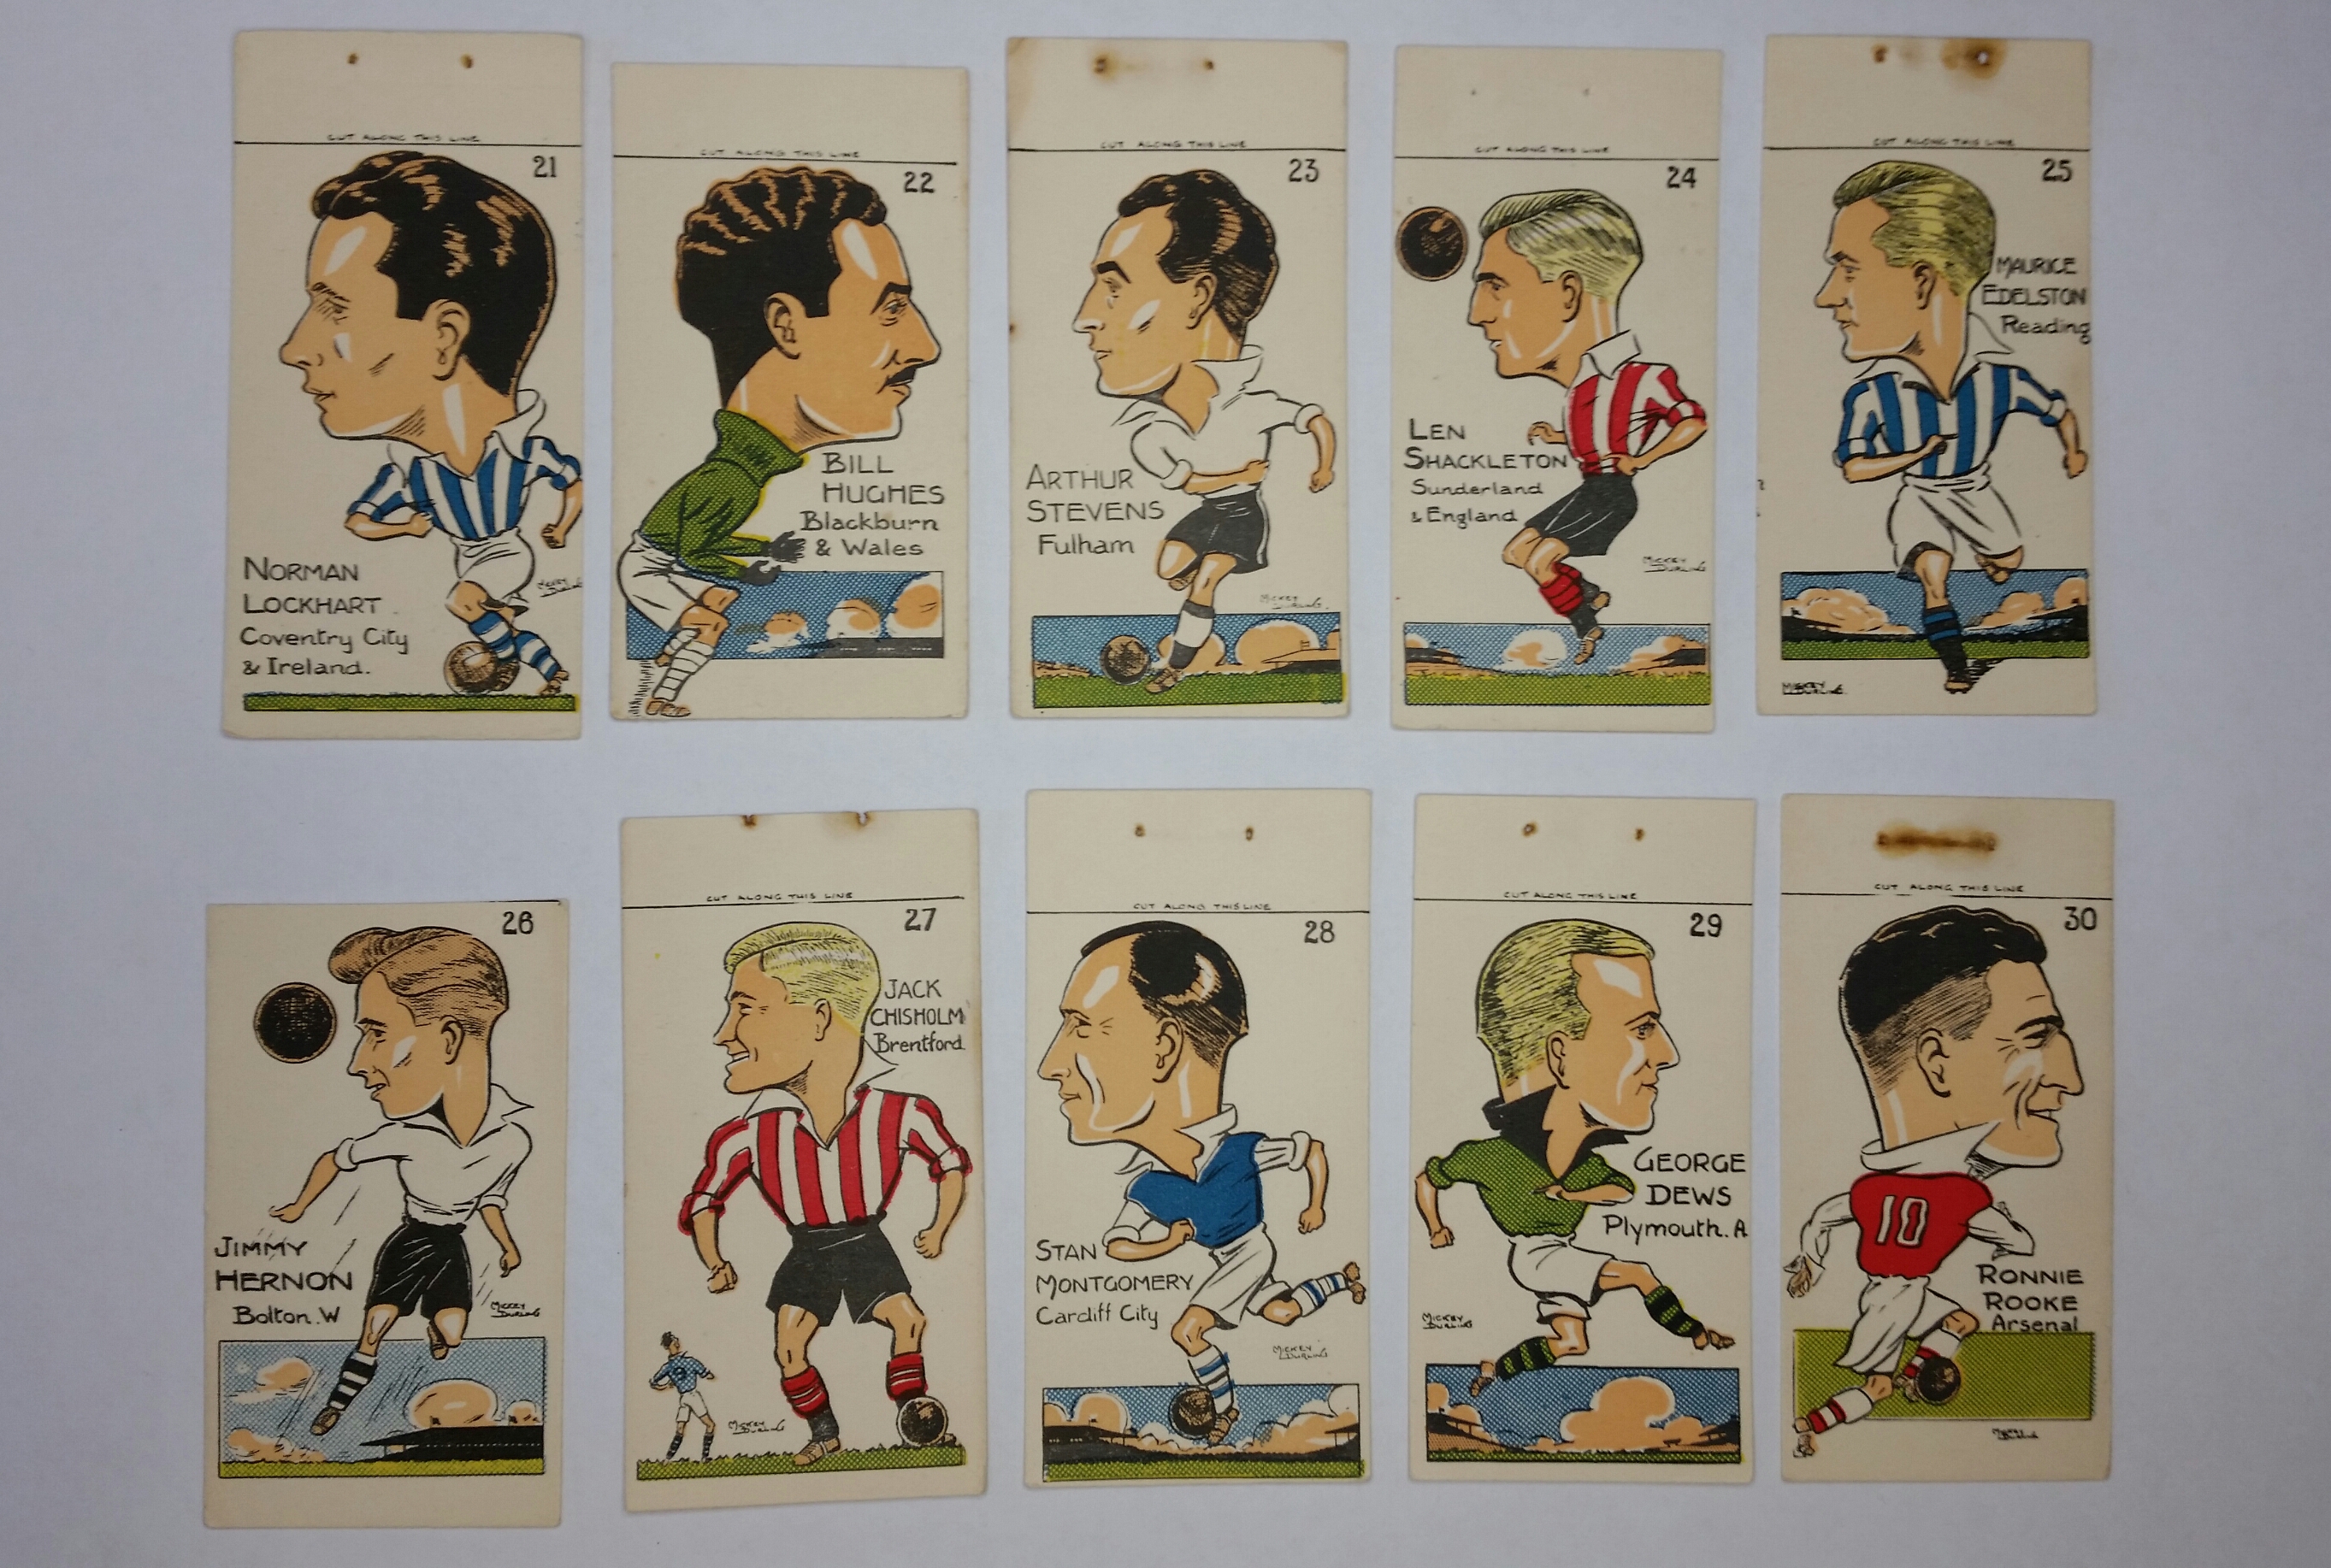 SUNDAY EMPIRE NEWS, Famous Footballers of To-Day by Durling, complete, uncut, VG to EX, 48 - Image 6 of 11